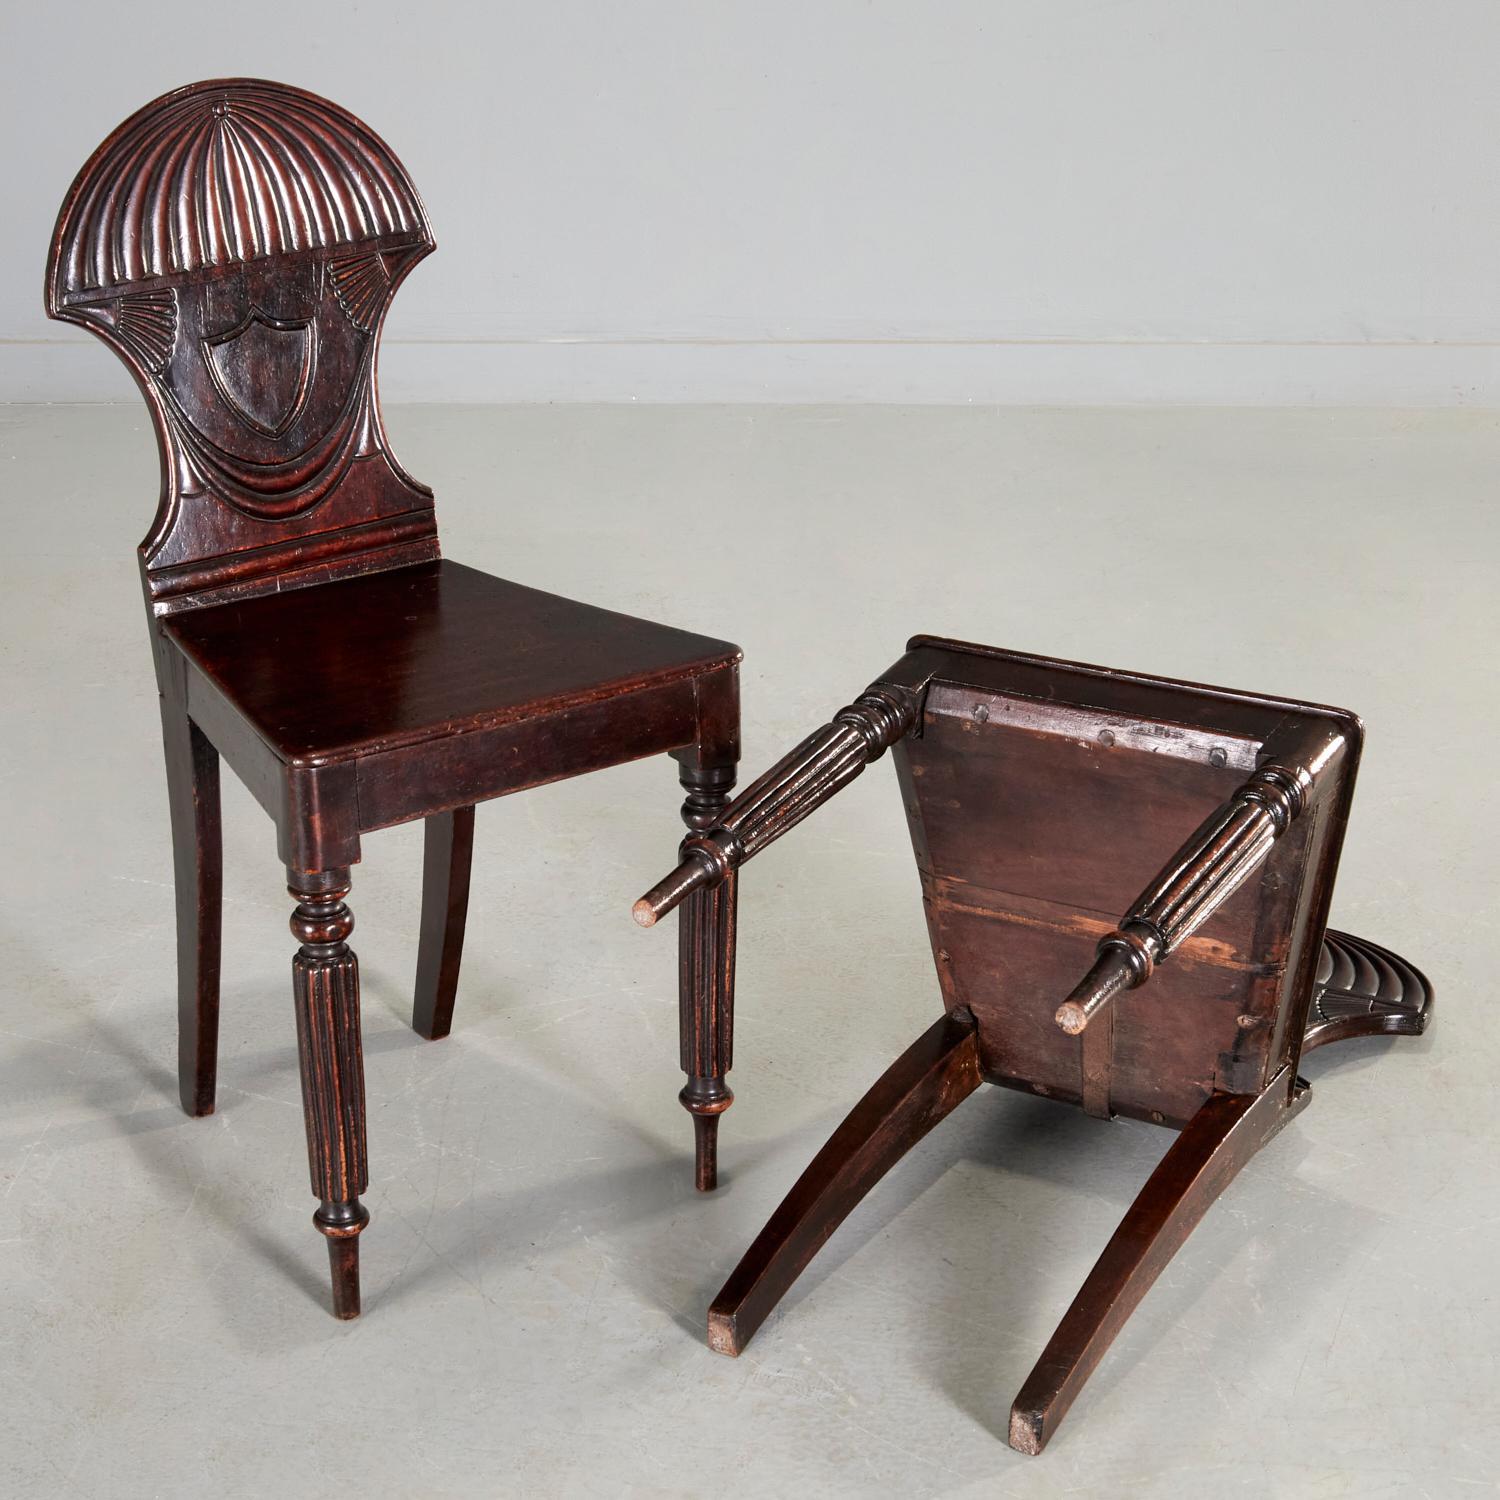 a pair of English Regency mahogany hall chairs, carved back with shield at center, on turned tapered reeded front legs, having rear sabre legs, England, 19th century